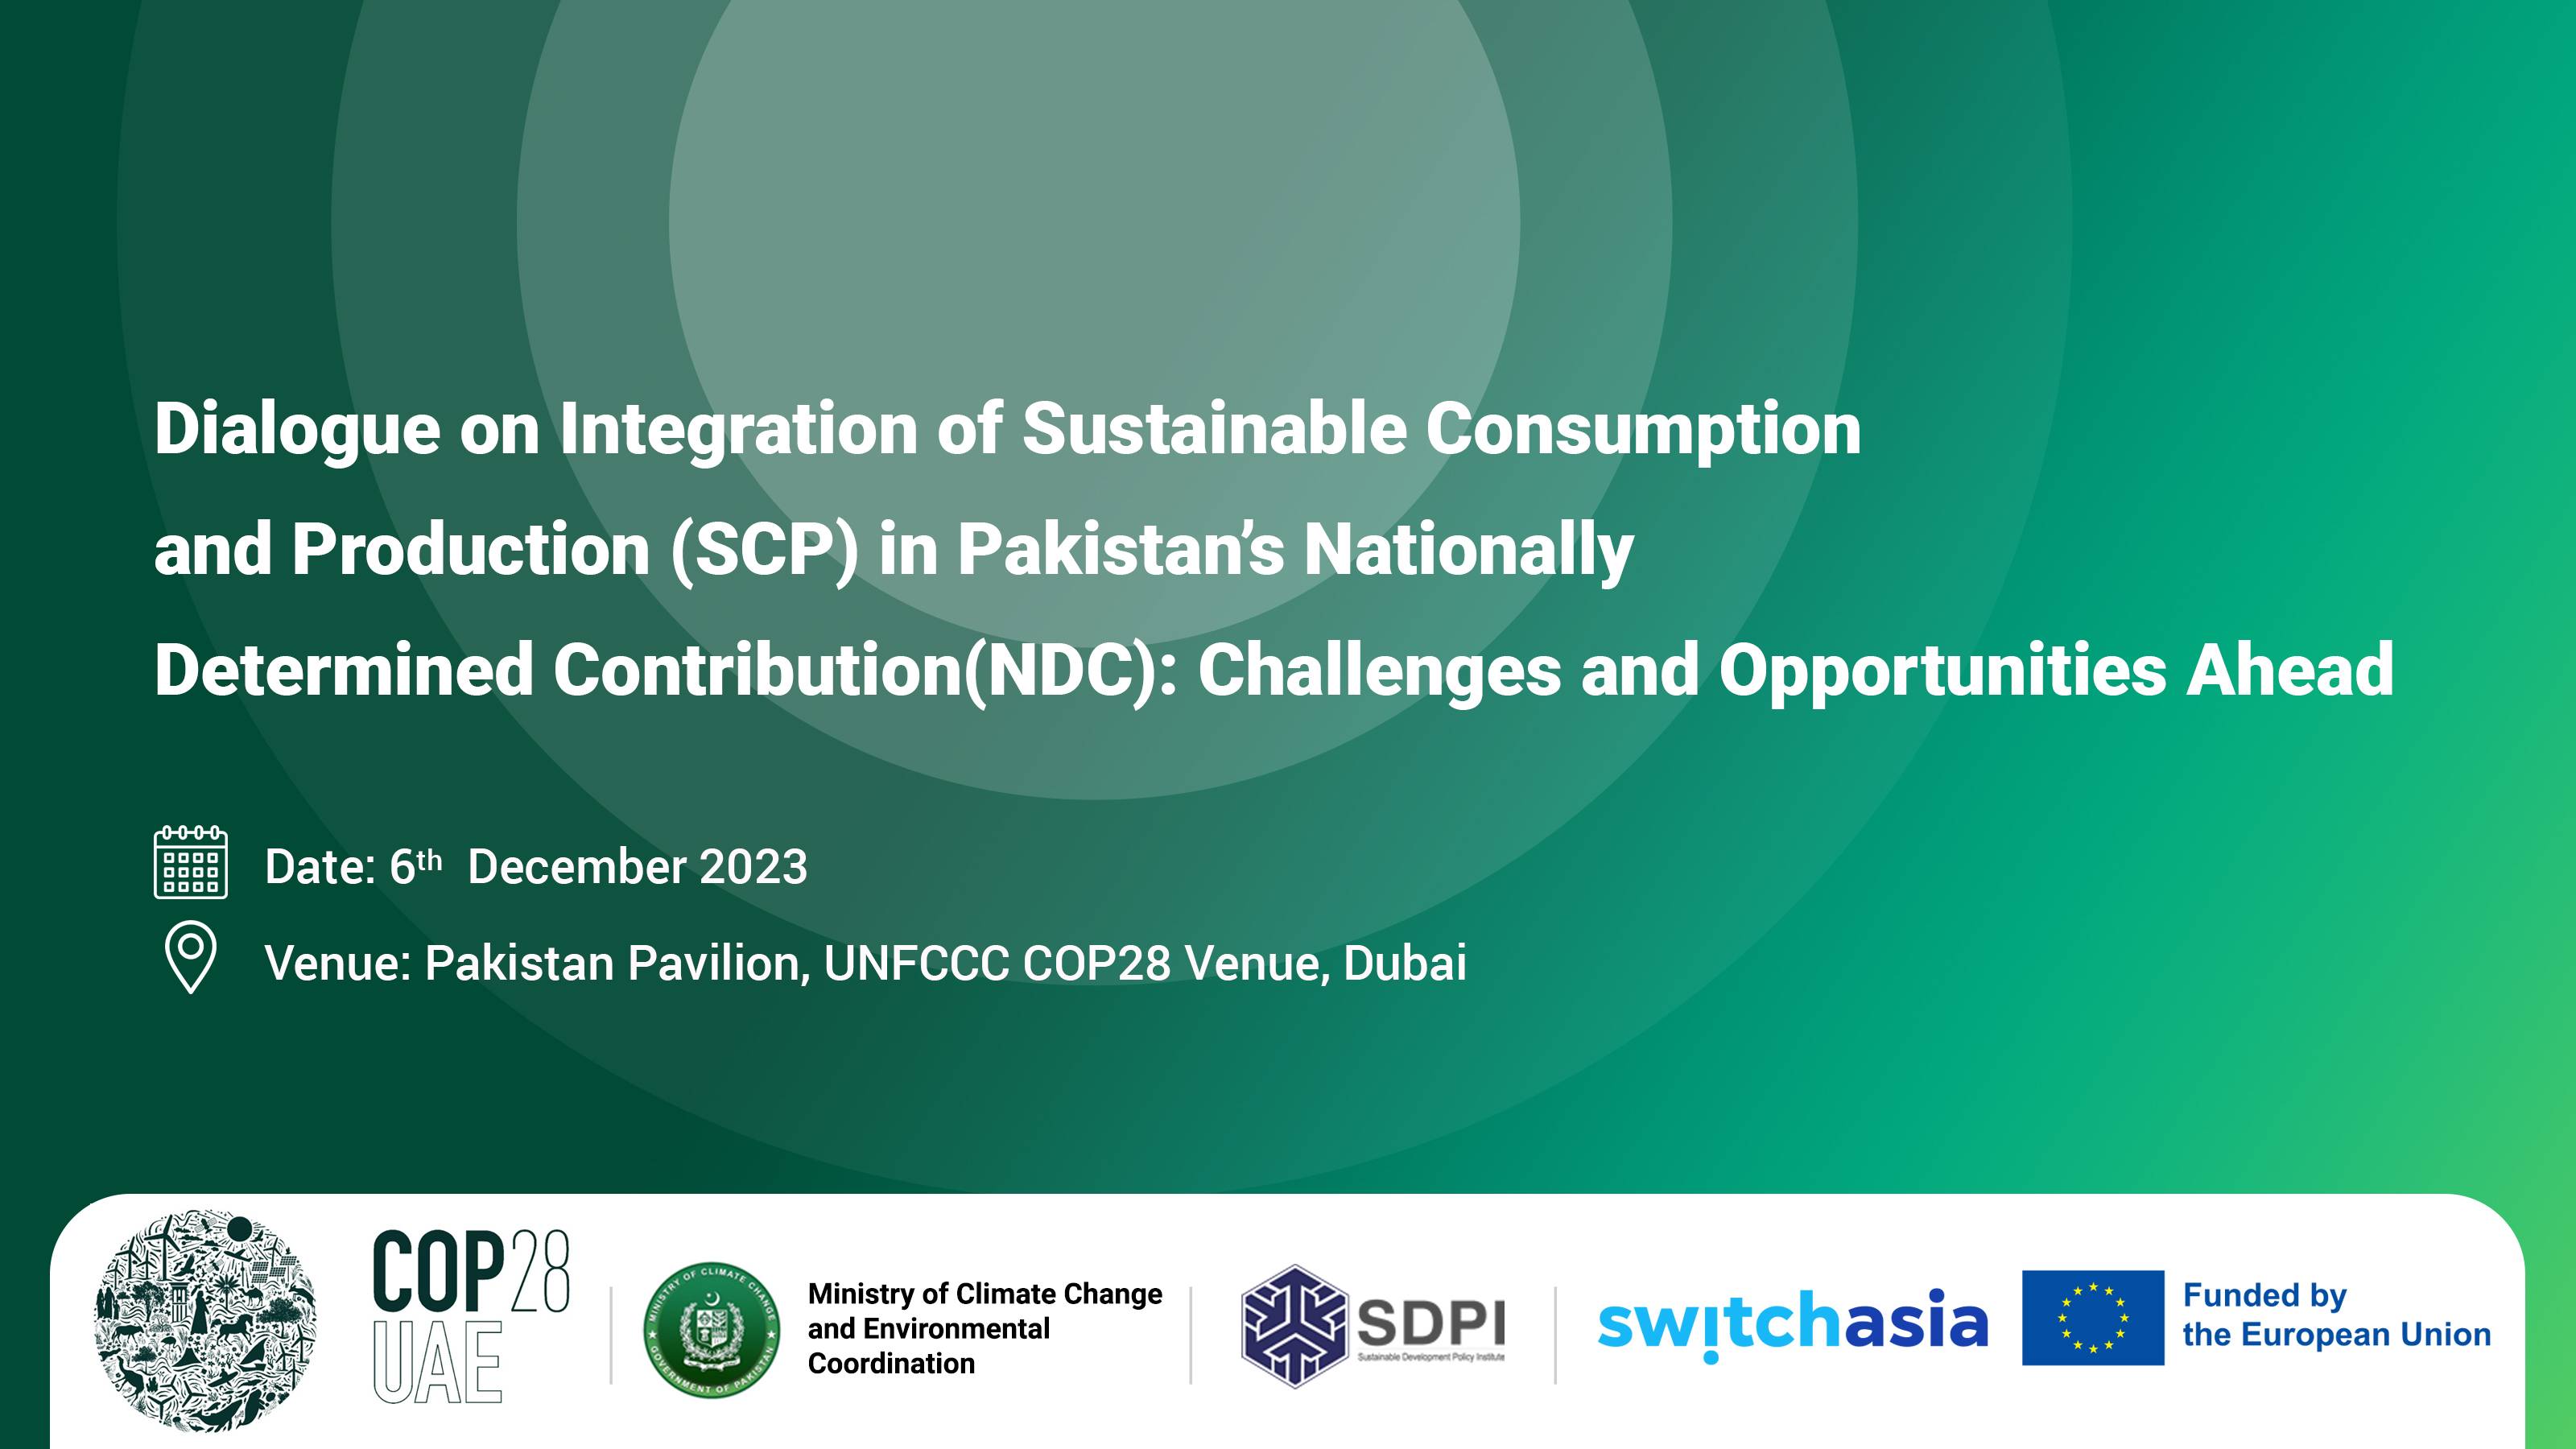 COP28: Dialogue on Integration of Sustainable Consumption and Production (SCP) in Pakistan’s Nationally Determined Contribution (NDC): Challenges and Opportunities Ahead